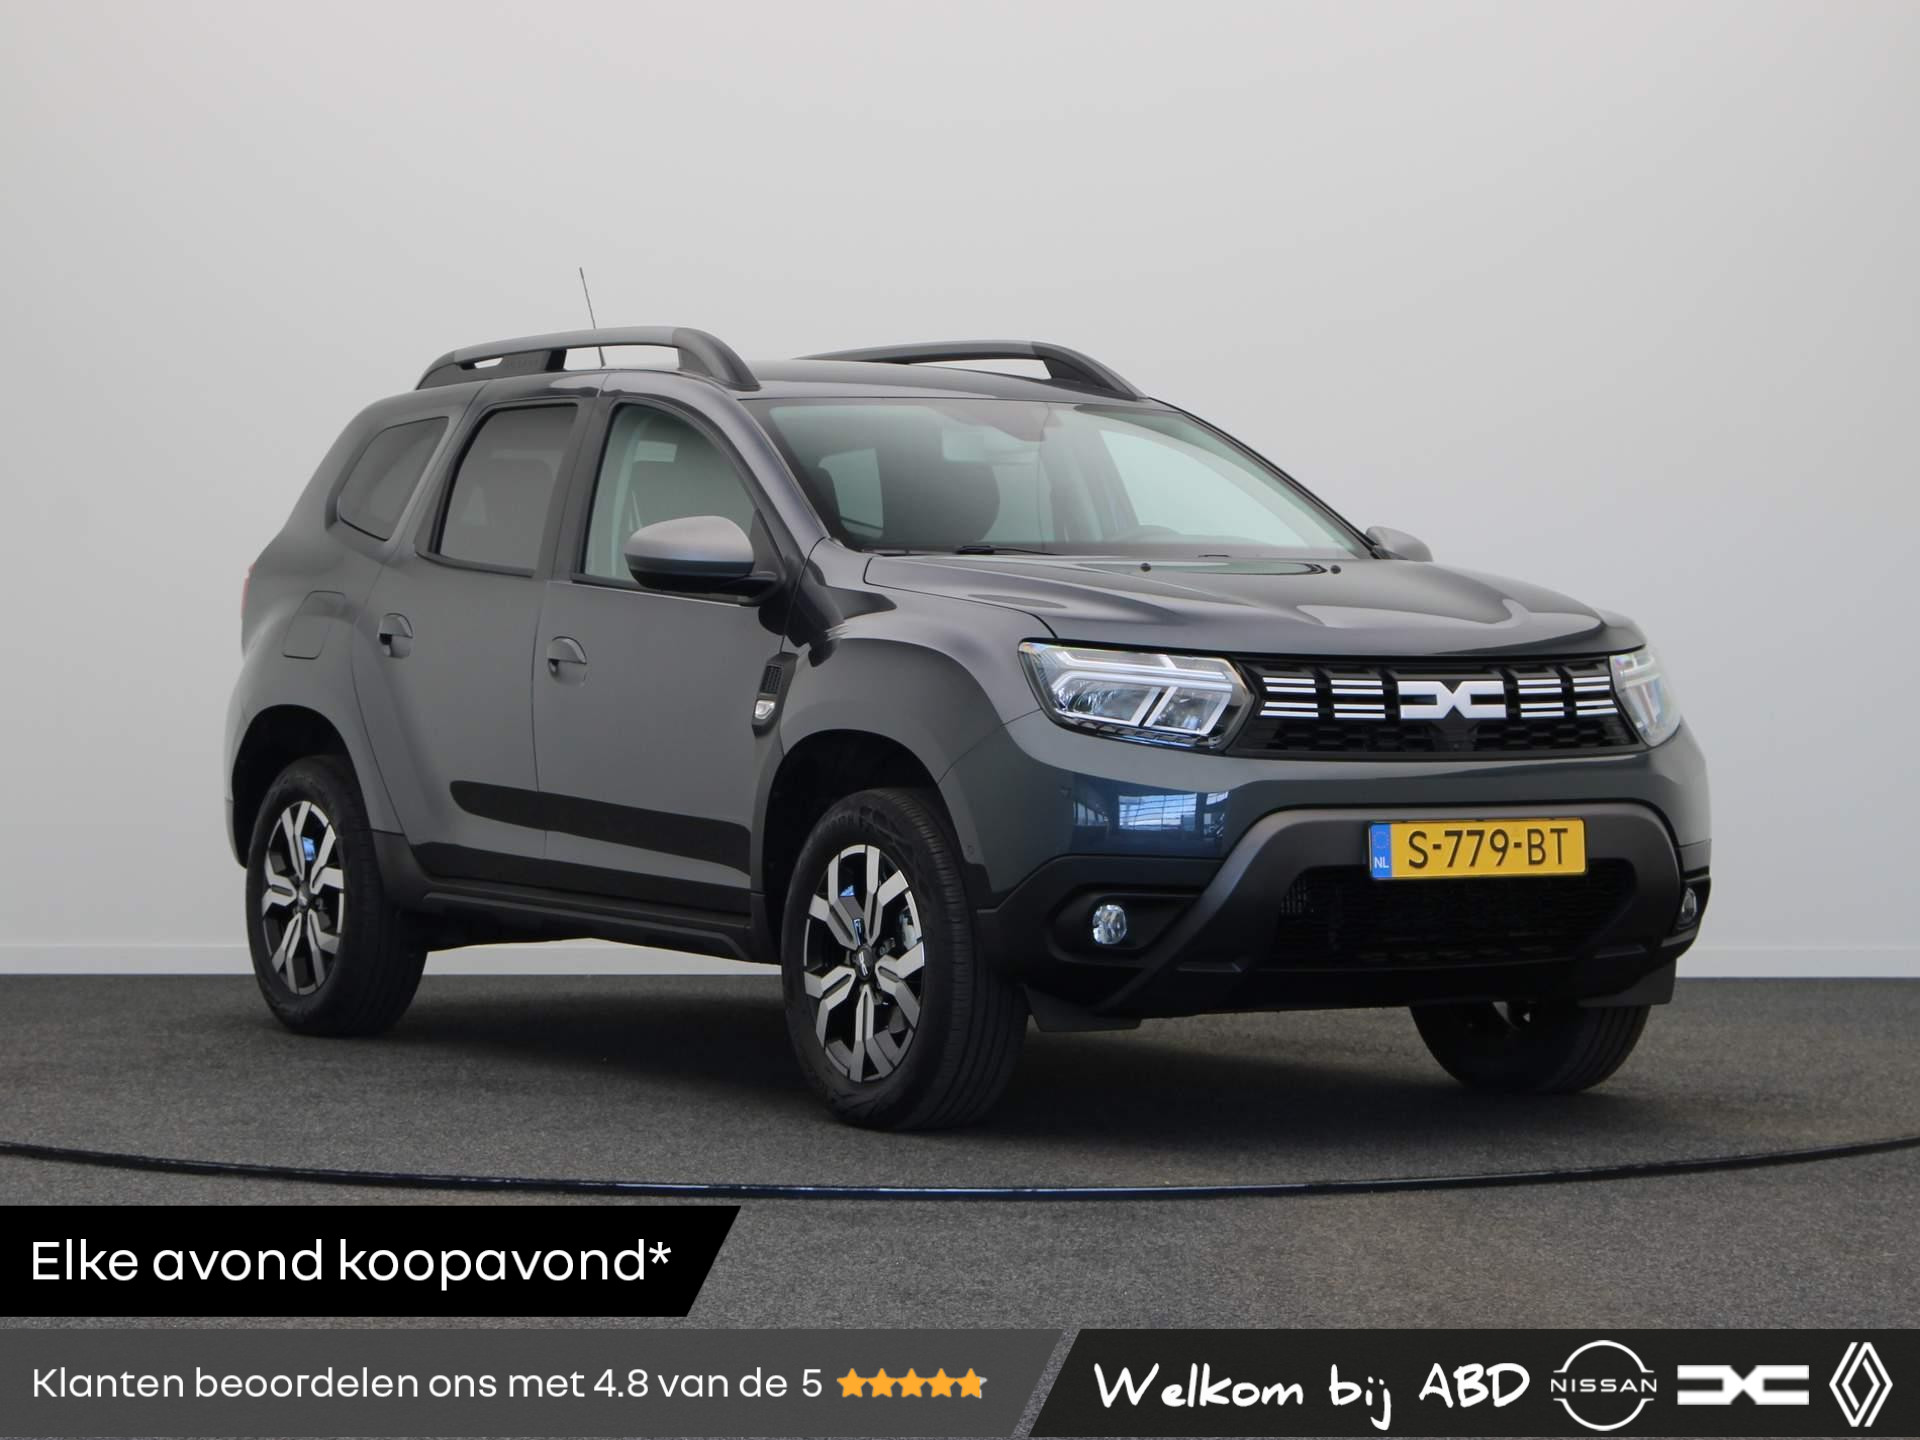 Dacia Duster 1.0 TCe 100 ECO-G Journey | LPG- G3 | Cruise Control | Climate Control | Keyless | bij viaBOVAG.nl